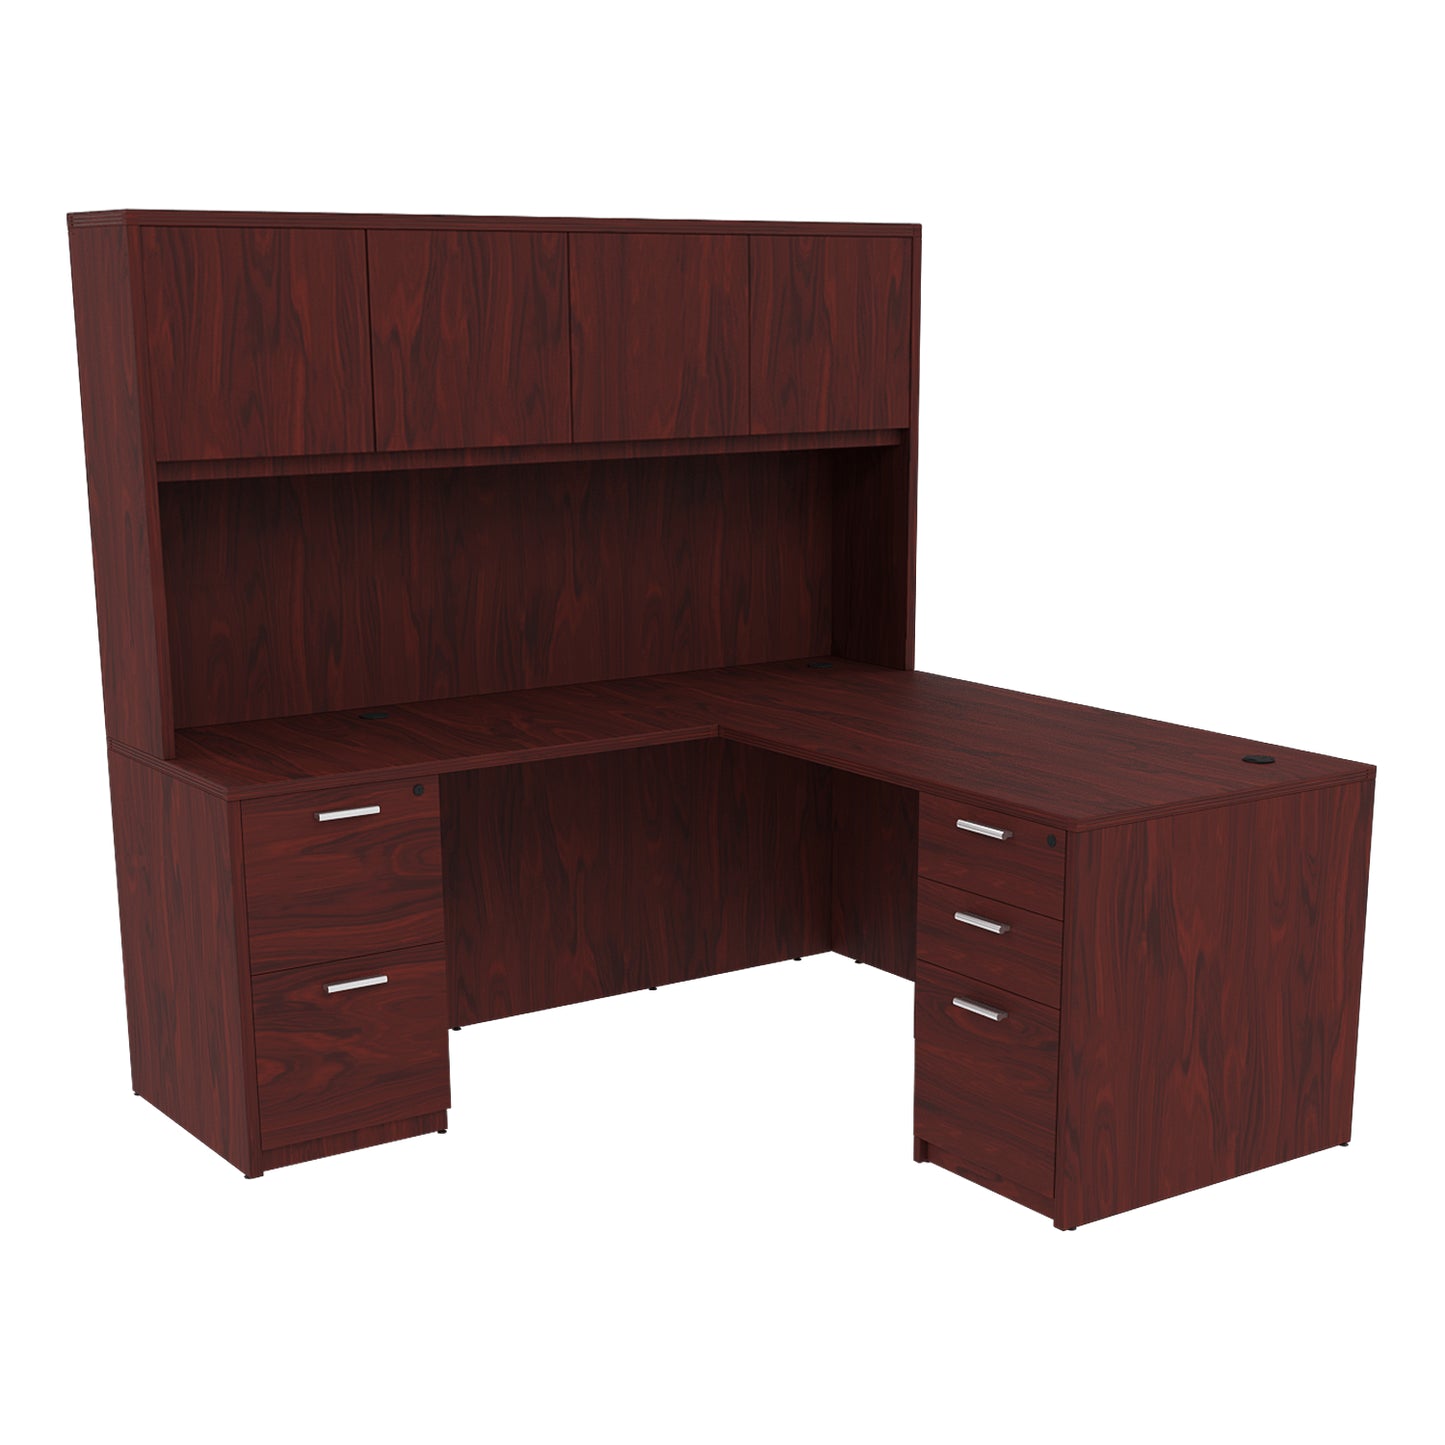 Kai L-Shaped Desk with Double Full Pedestals & 4 Door Hutch